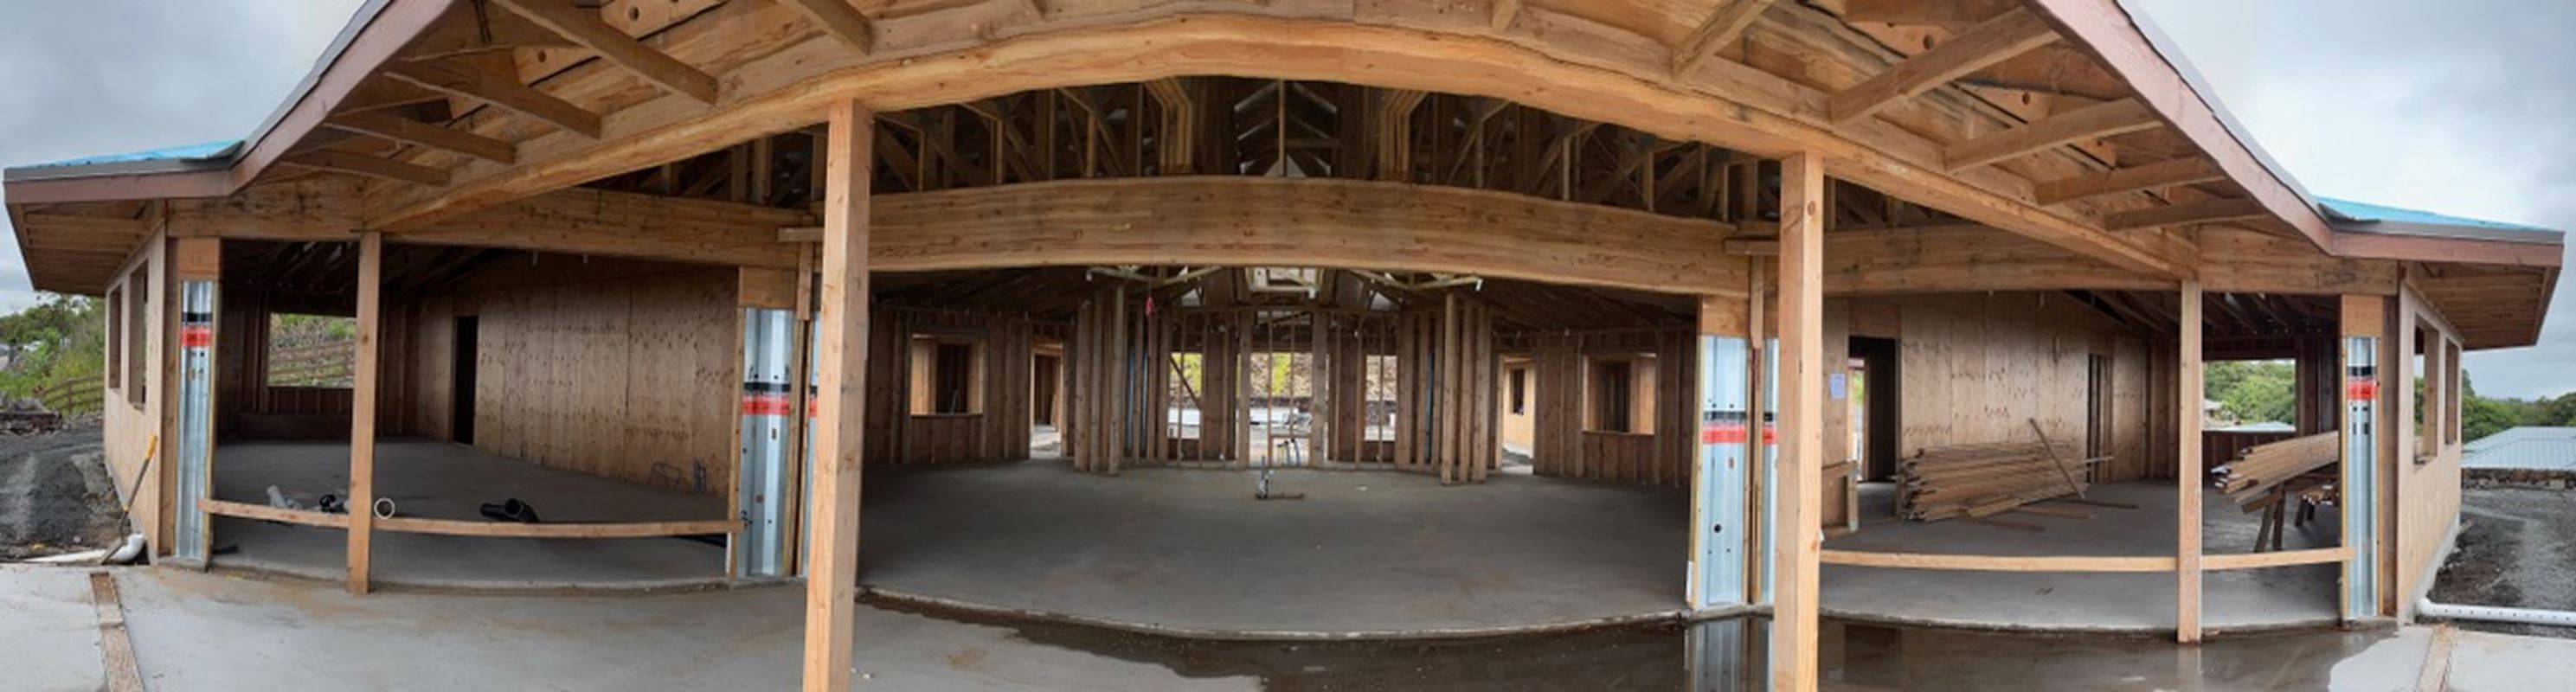 Panoramic view of the front of a house under construction